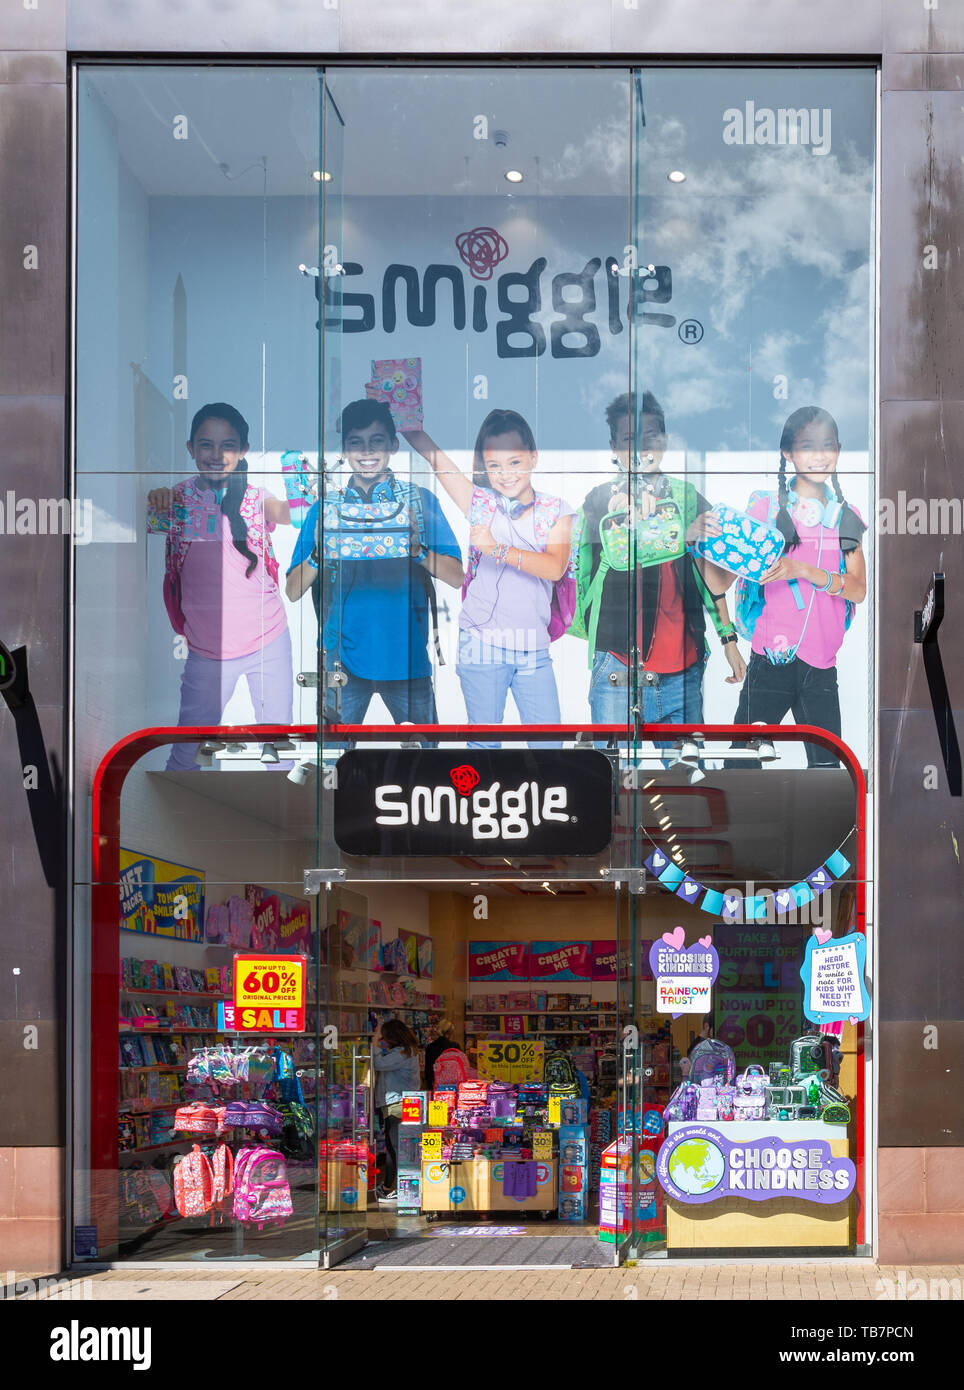 Smiggle, Stationary Stores at White Rose Shopping Centre